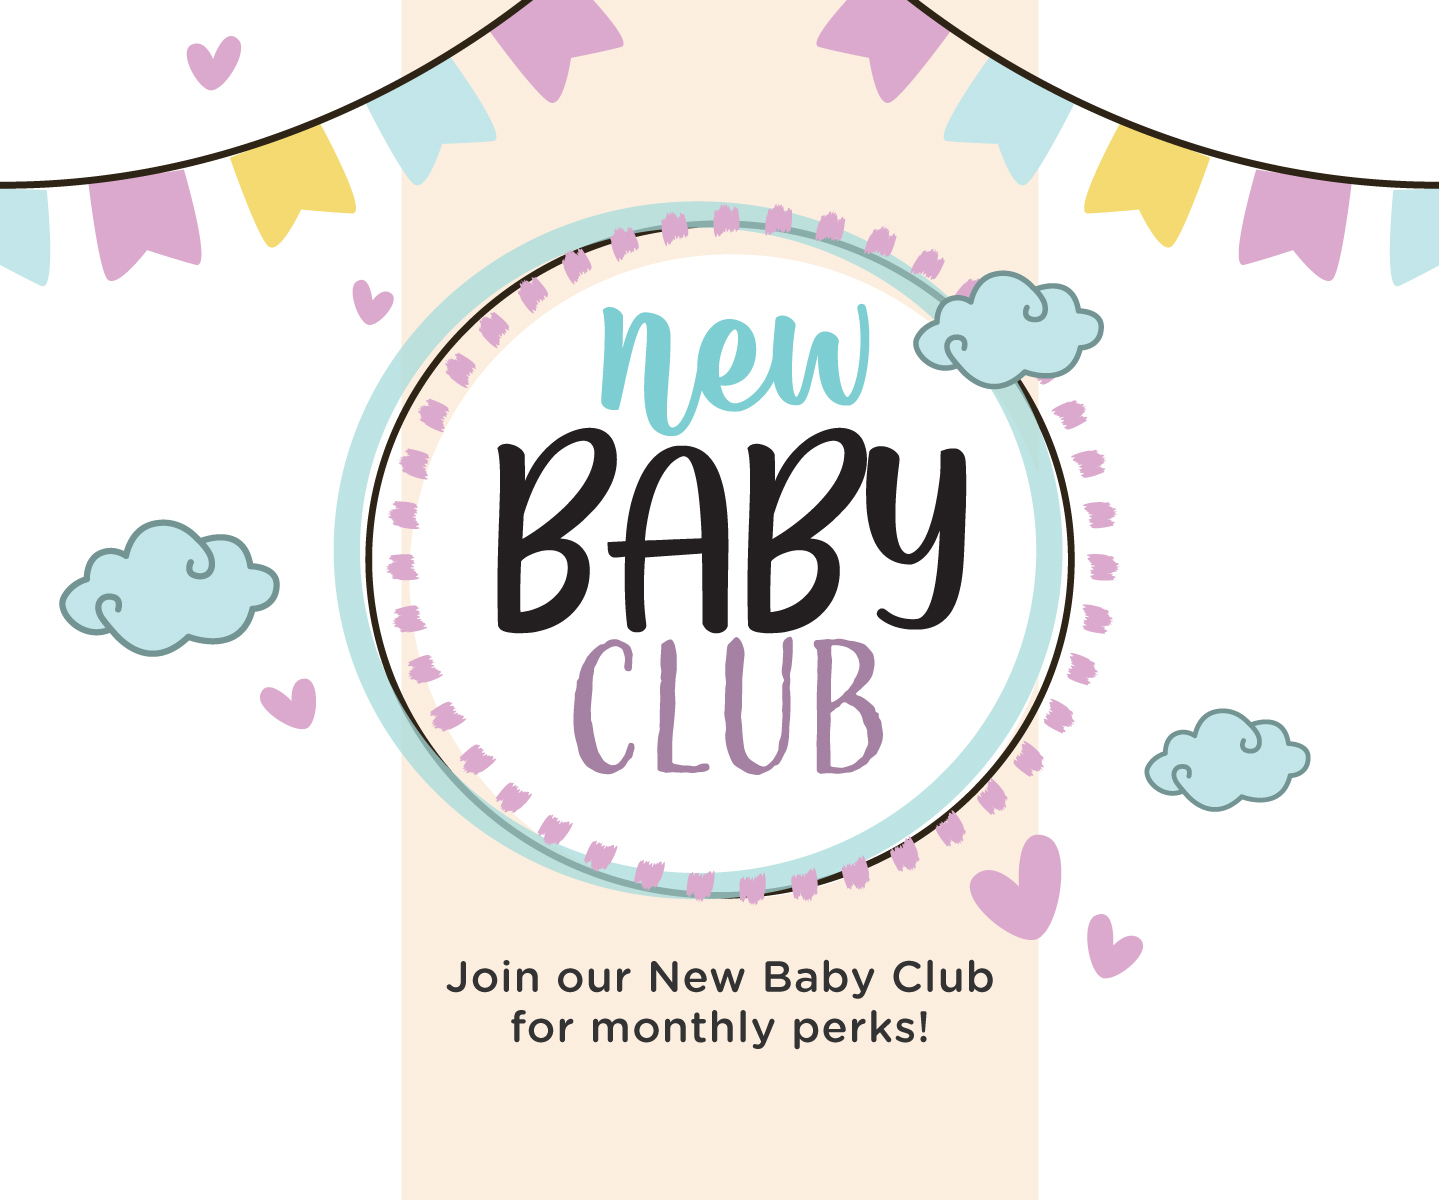 Join our New Baby Club for monthly rewards and promotions!